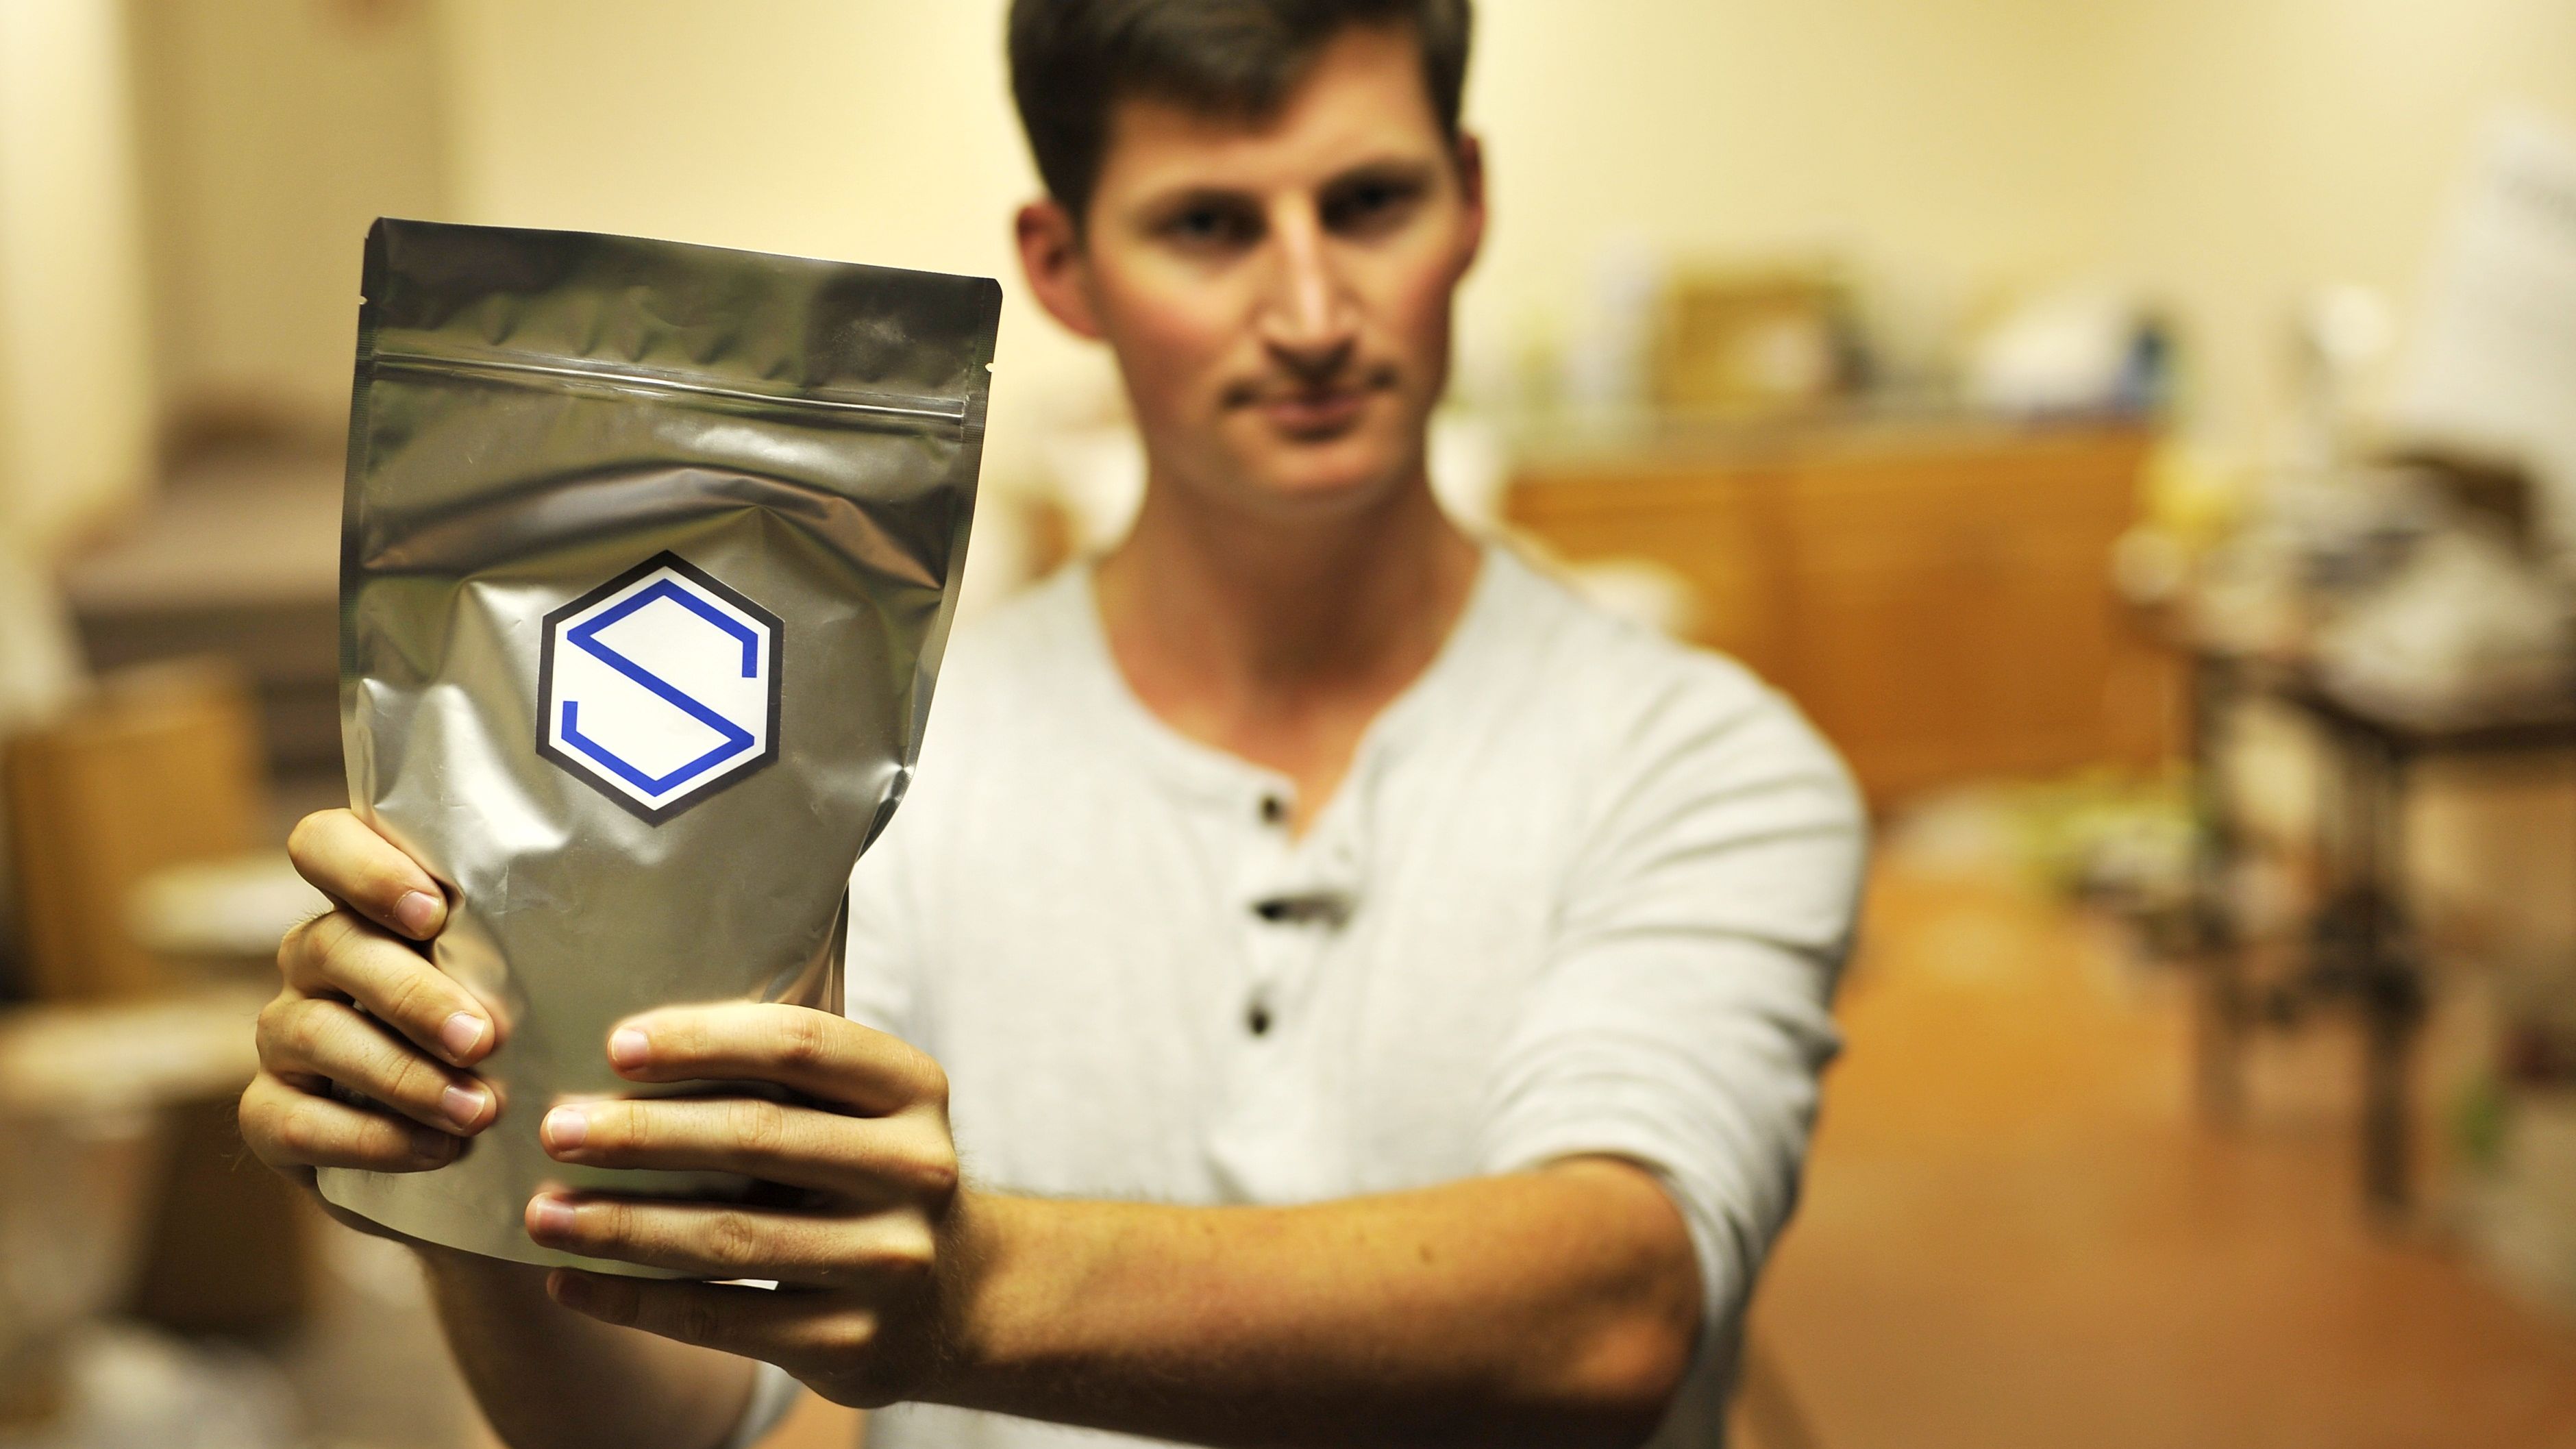 Soylent creator and CEO Rob Rhinehart says he'd like to take on world hunger, "but we have to be profitable first."